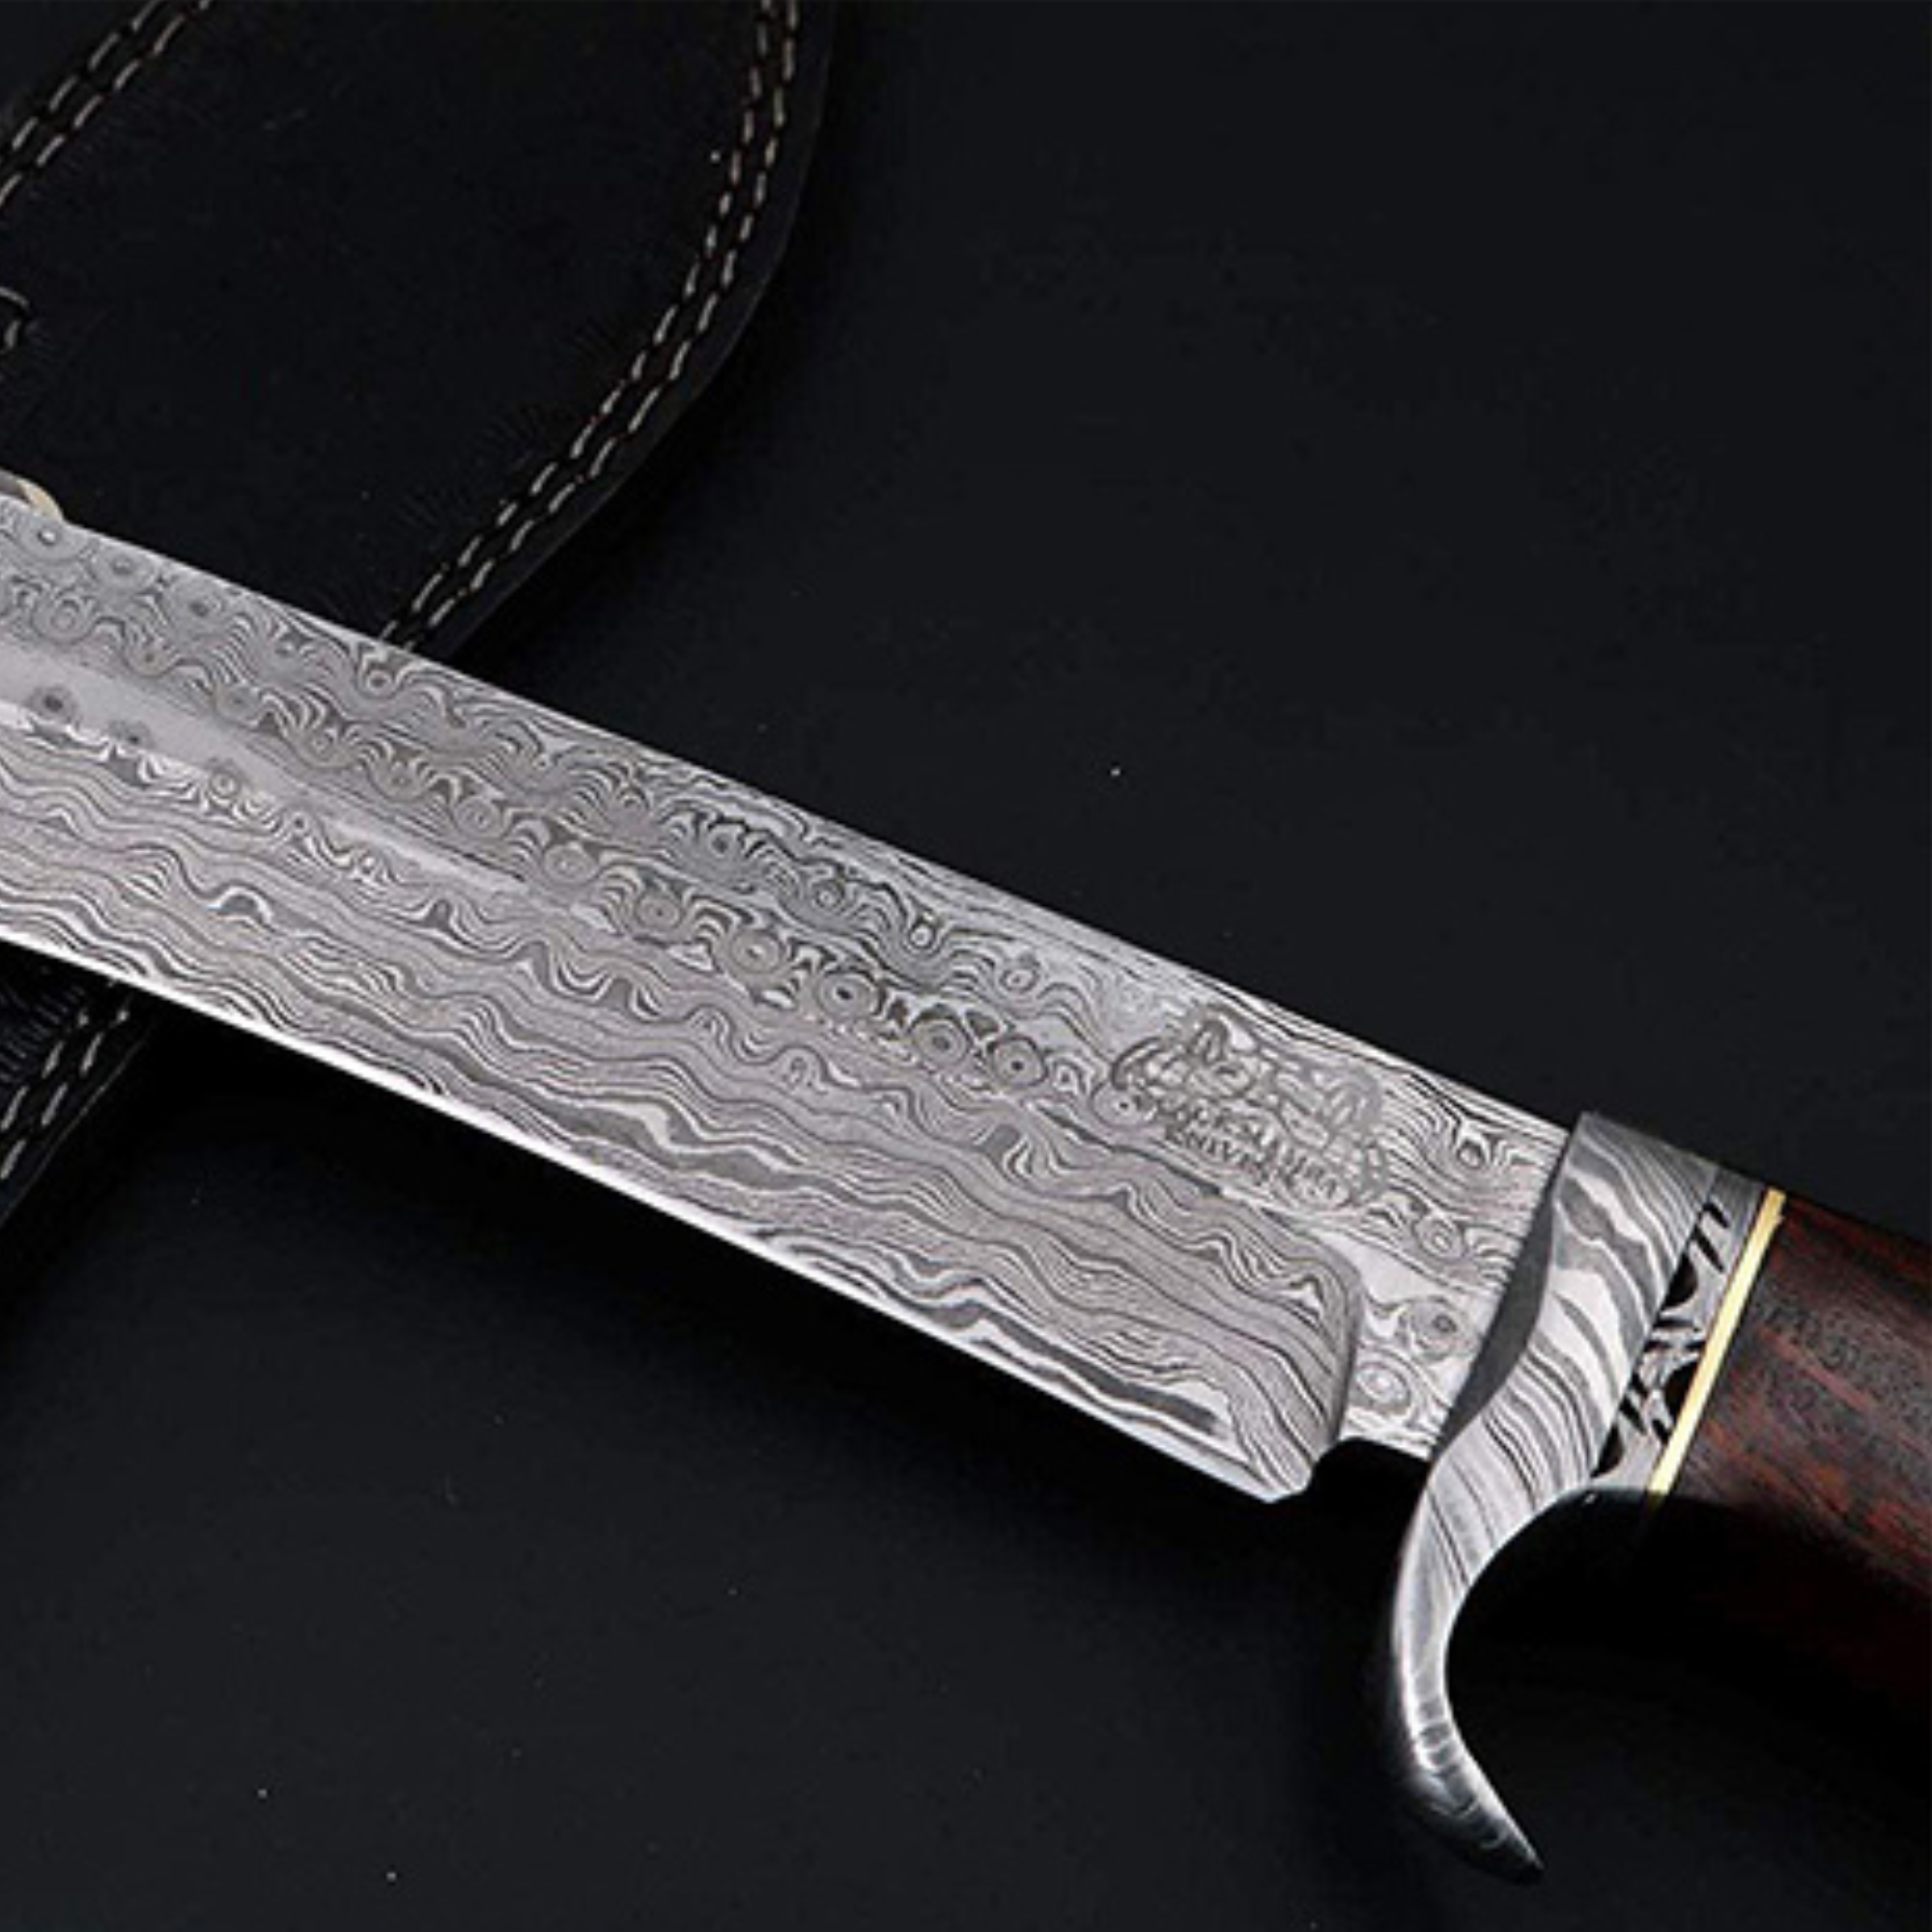 Sequoia Knife 15 Inches LONG 9 Inches BLADE 13 Ounce Hunting Fixed Blade Bowie Knife Handmade Damascus Knife